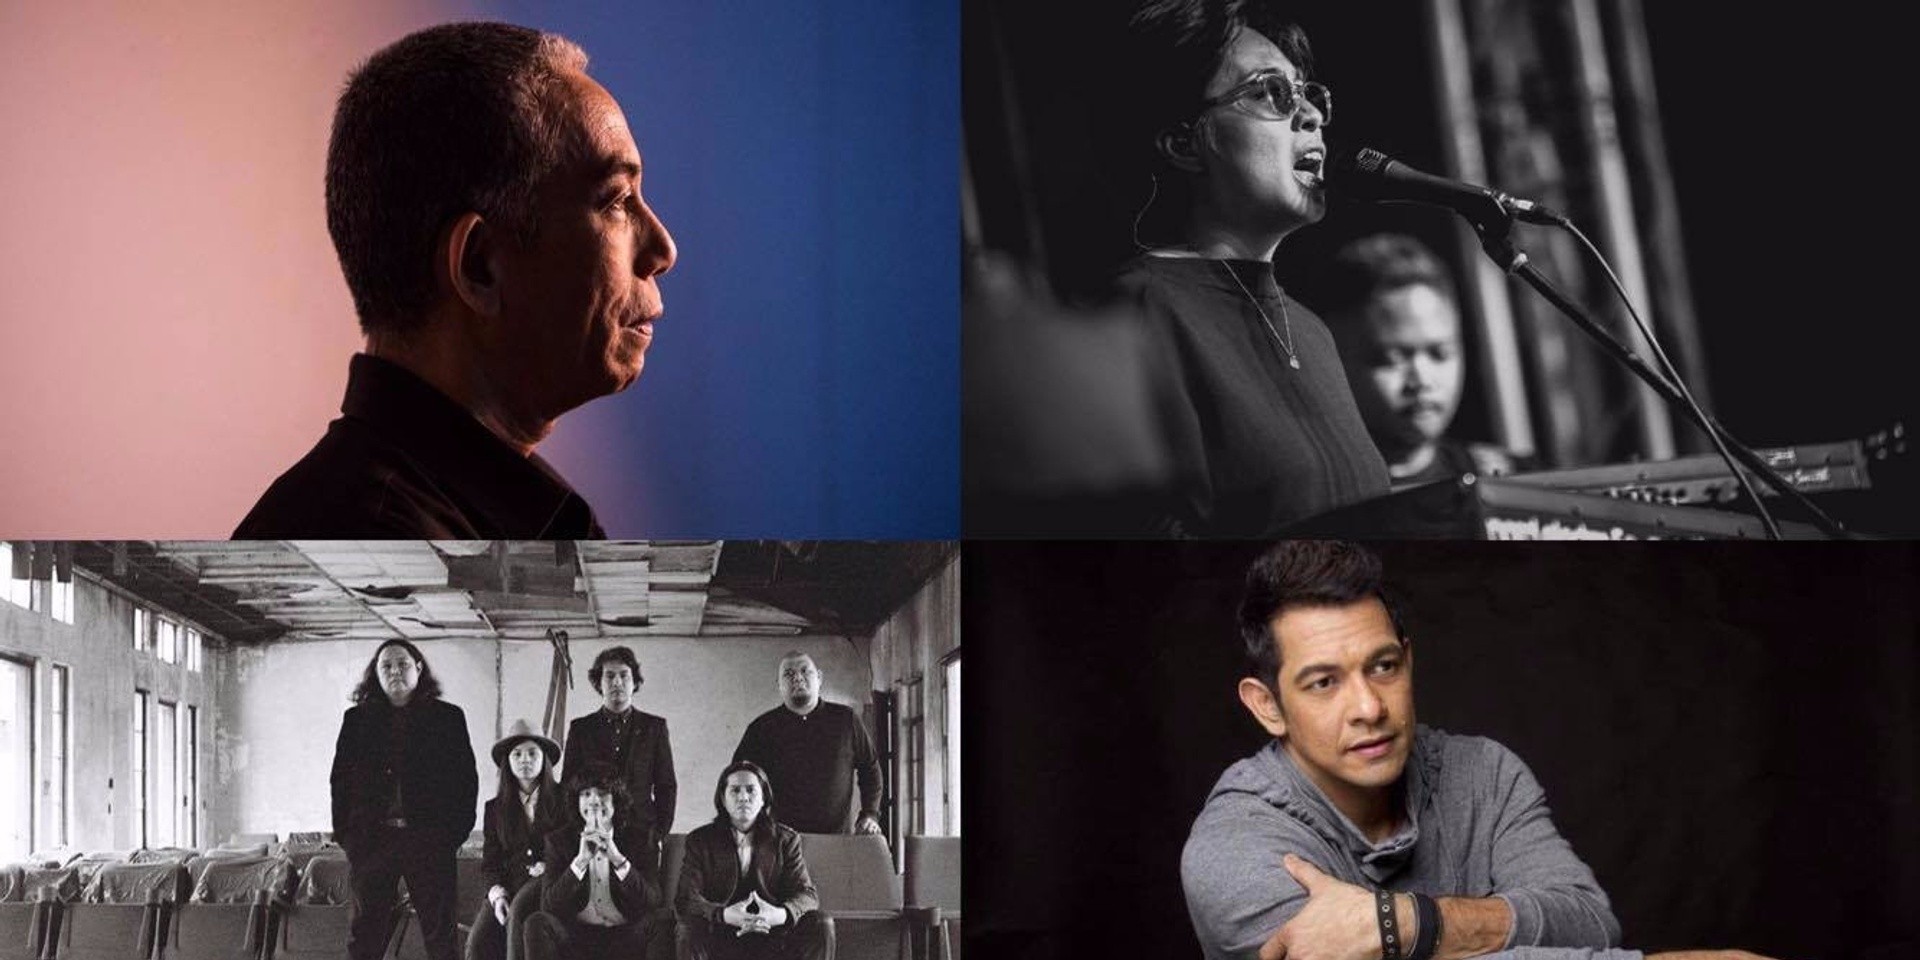 Gary Valenciano, Joey Ayala, UDD, and more to perform in Sagada's A Concert in the Clouds